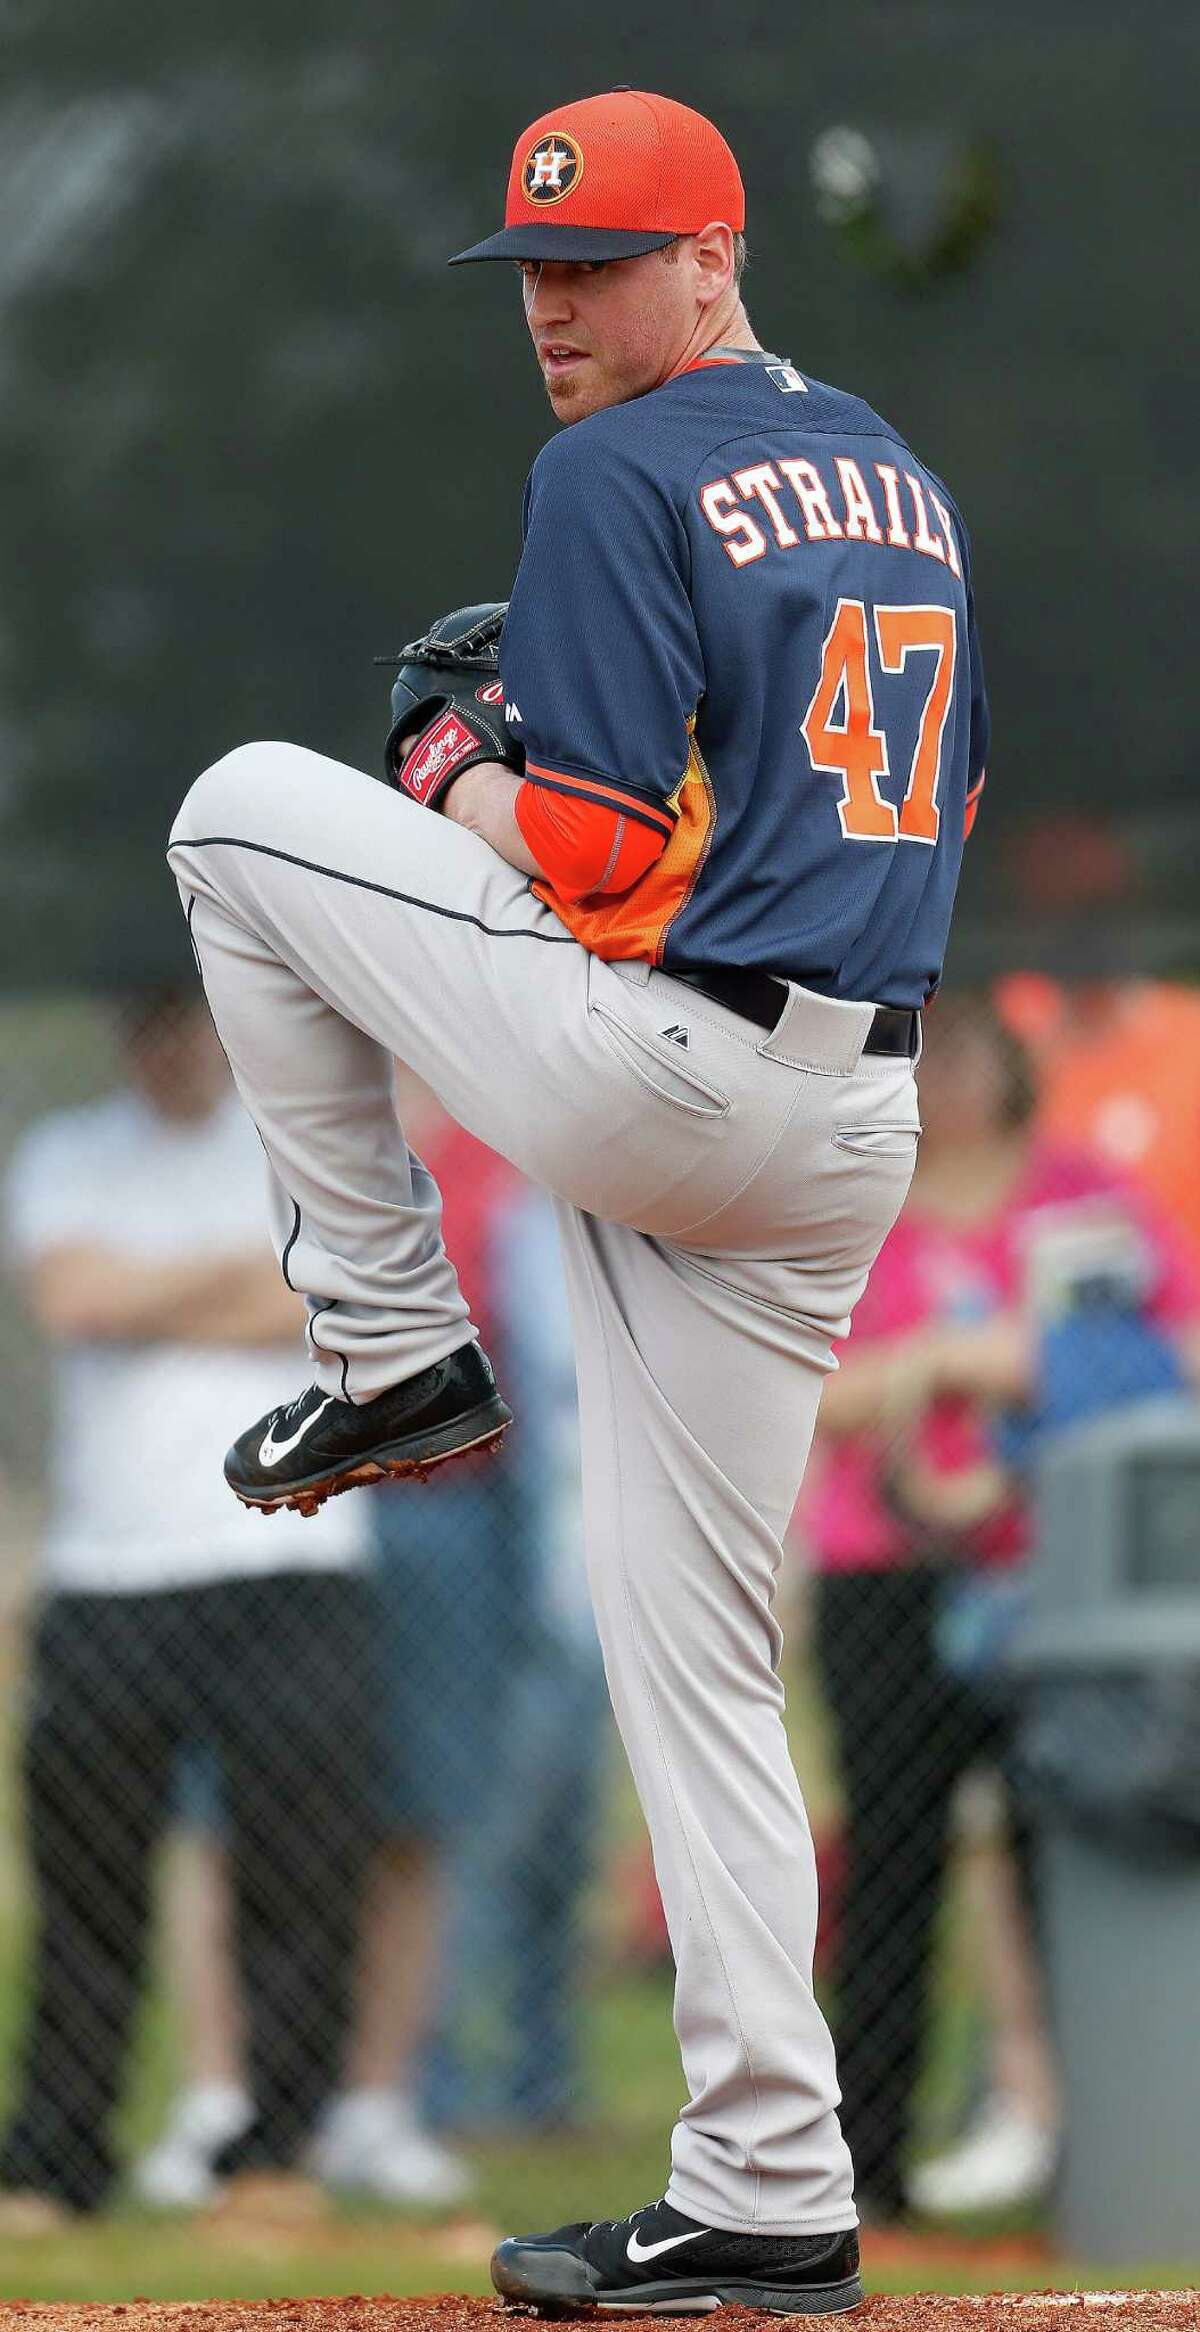 Houston Astros starting pitcher Dan Straily (47) pitches during spring training workouts for pitchers and catchers at their Osceola County training facility, Monday, Feb. 23, 2015, in Kissimmee. ( Karen Warren / Houston Chronicle )